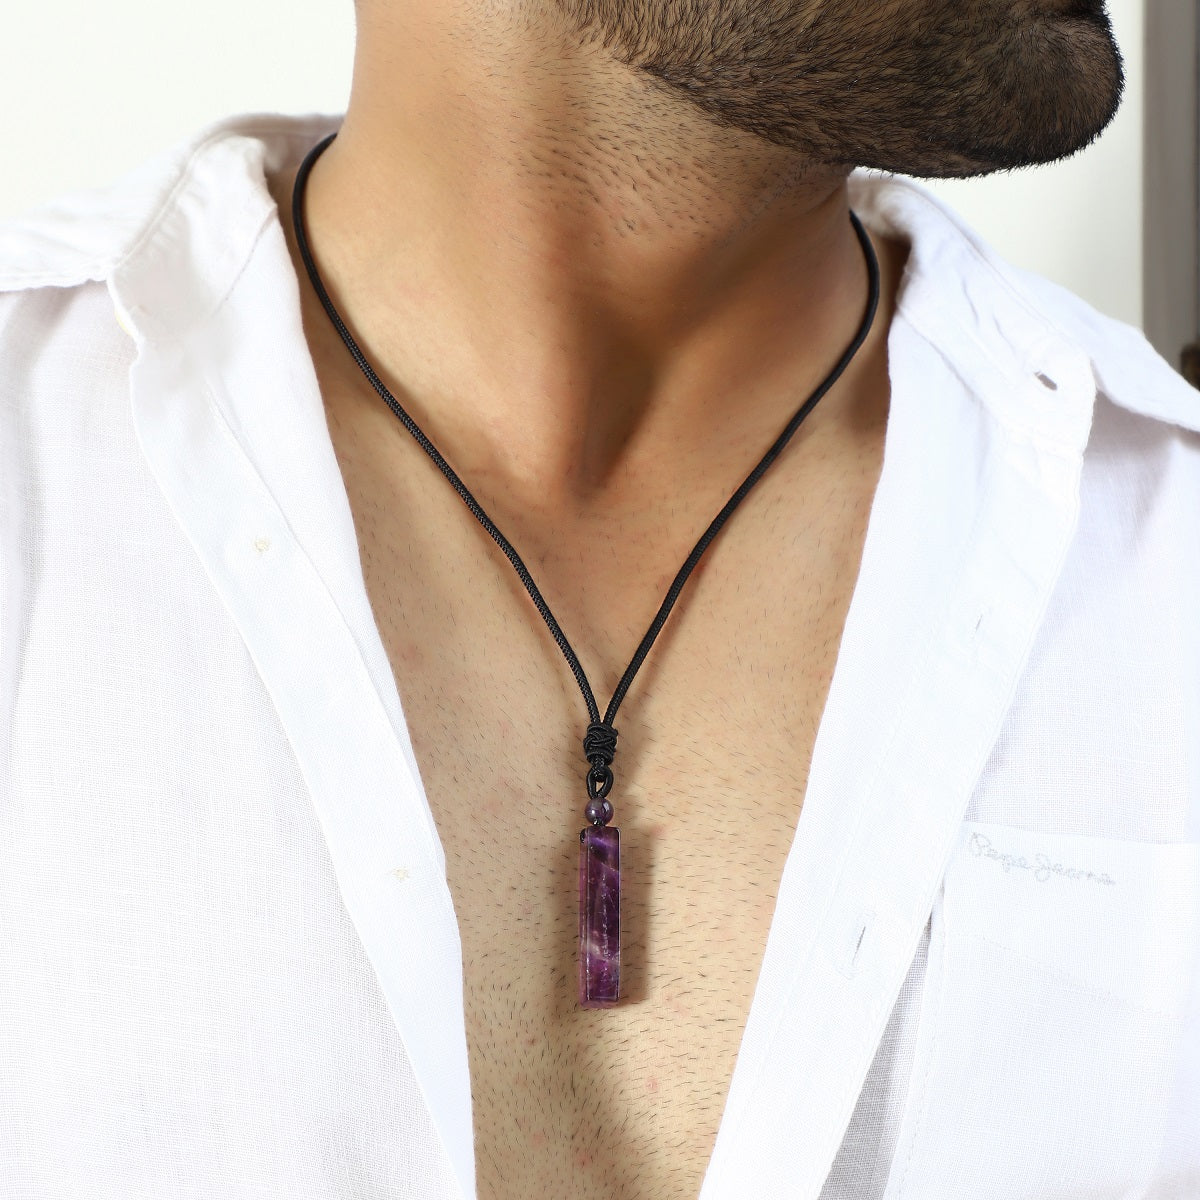 Pendant necklace featuring an Amethyst gemstone in a wrapped design.